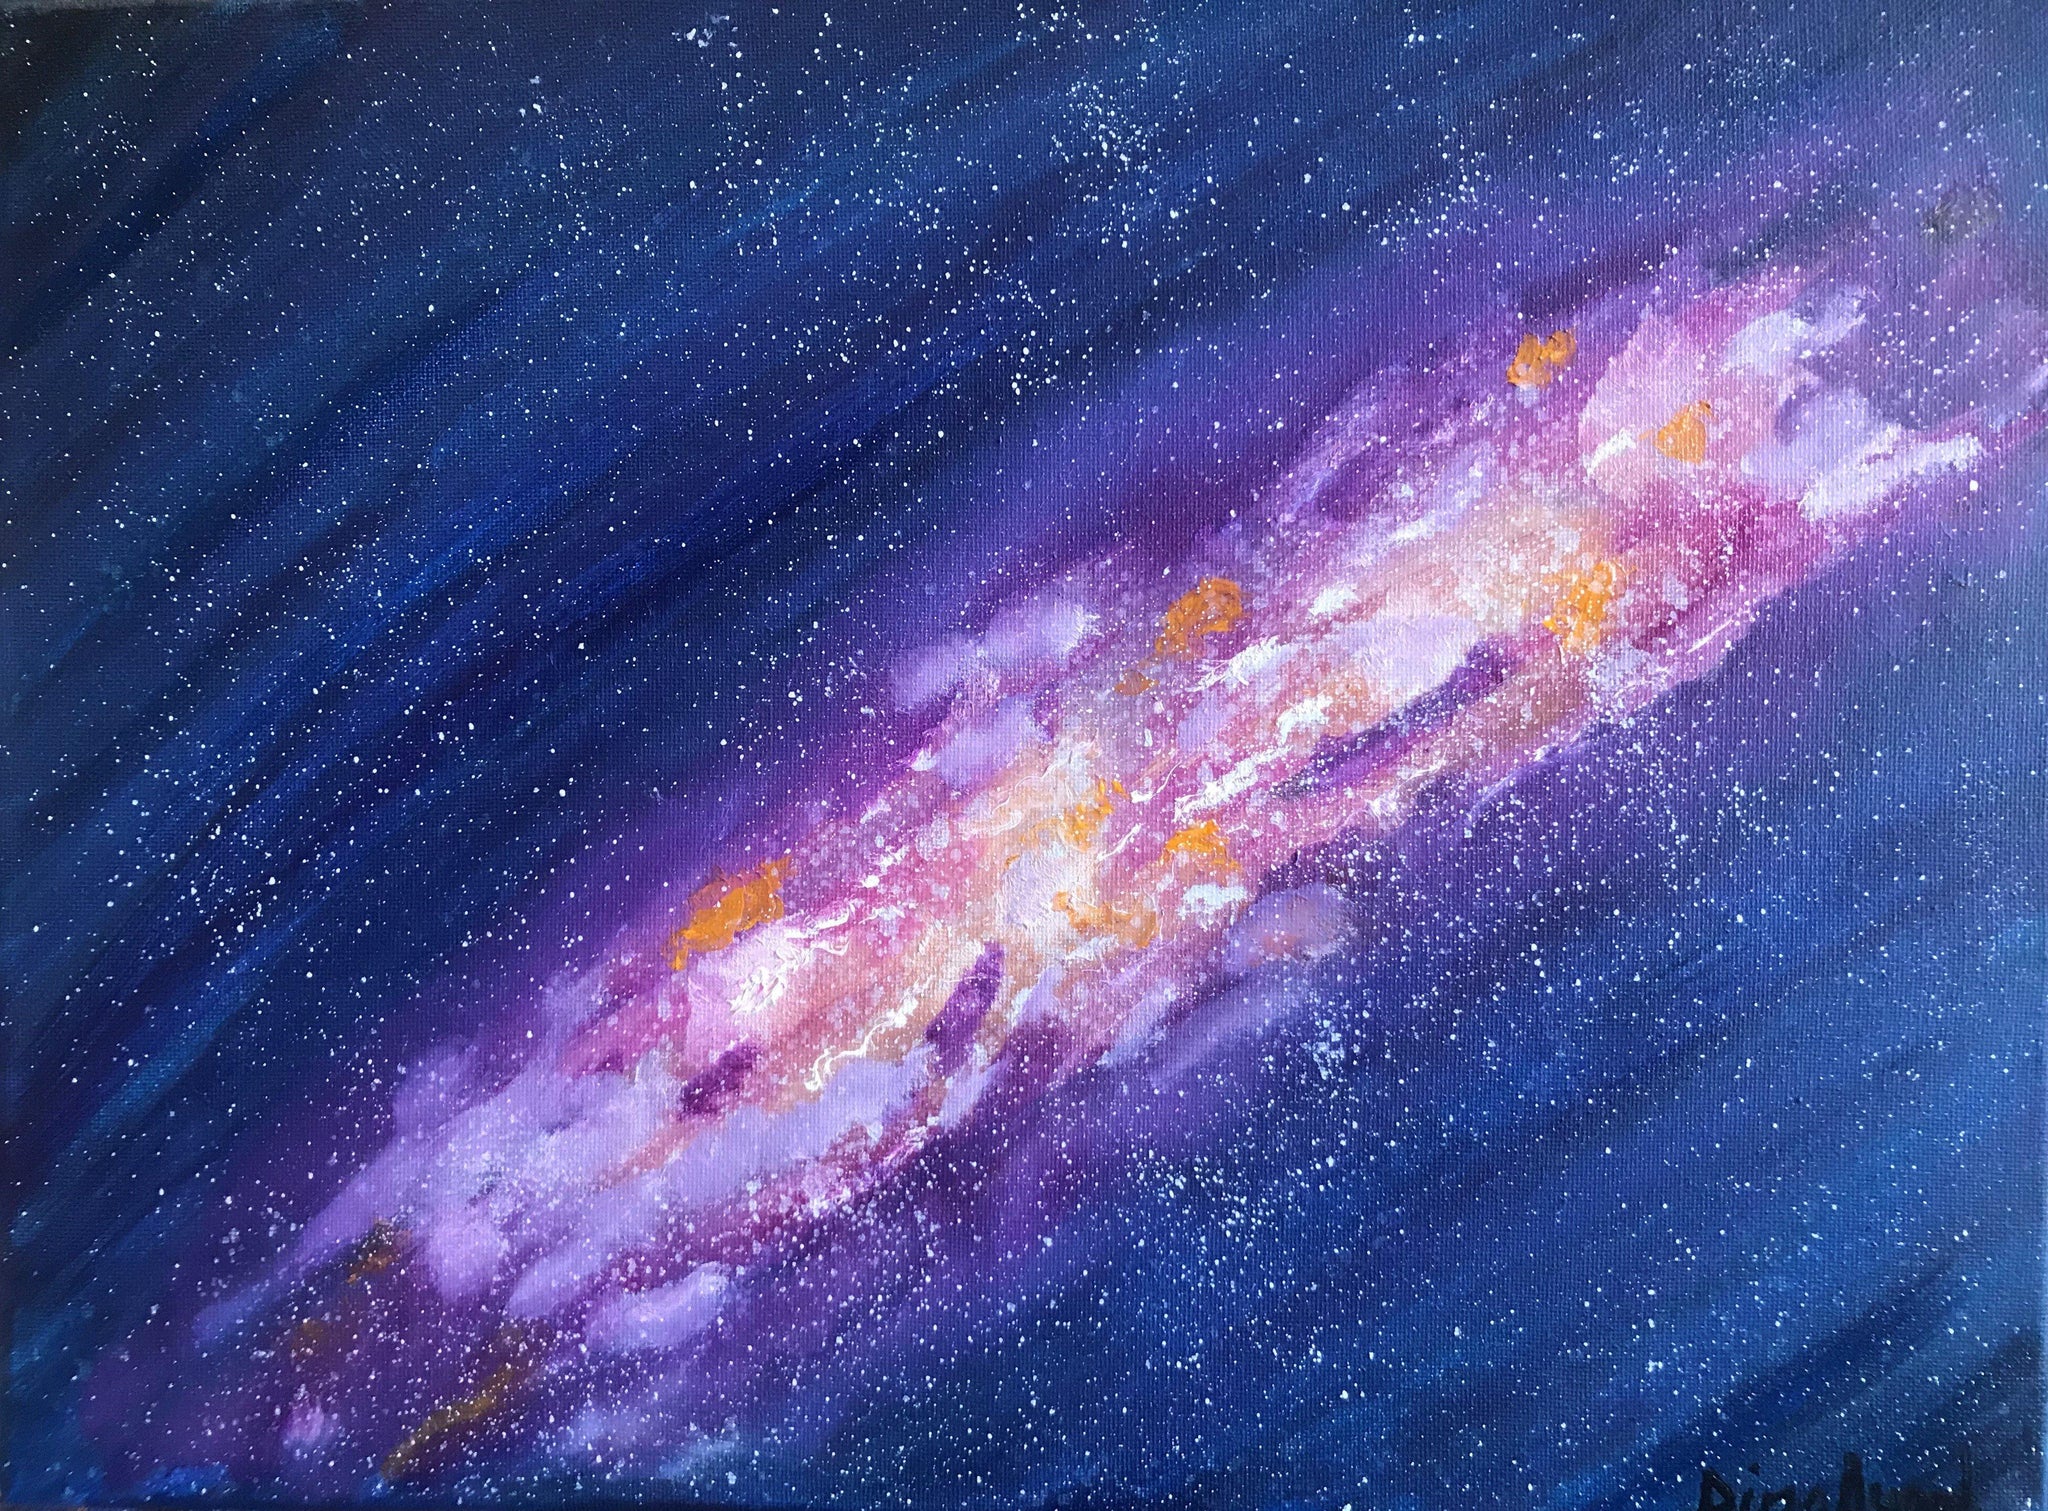 Original oil painting of space, galaxy and stars